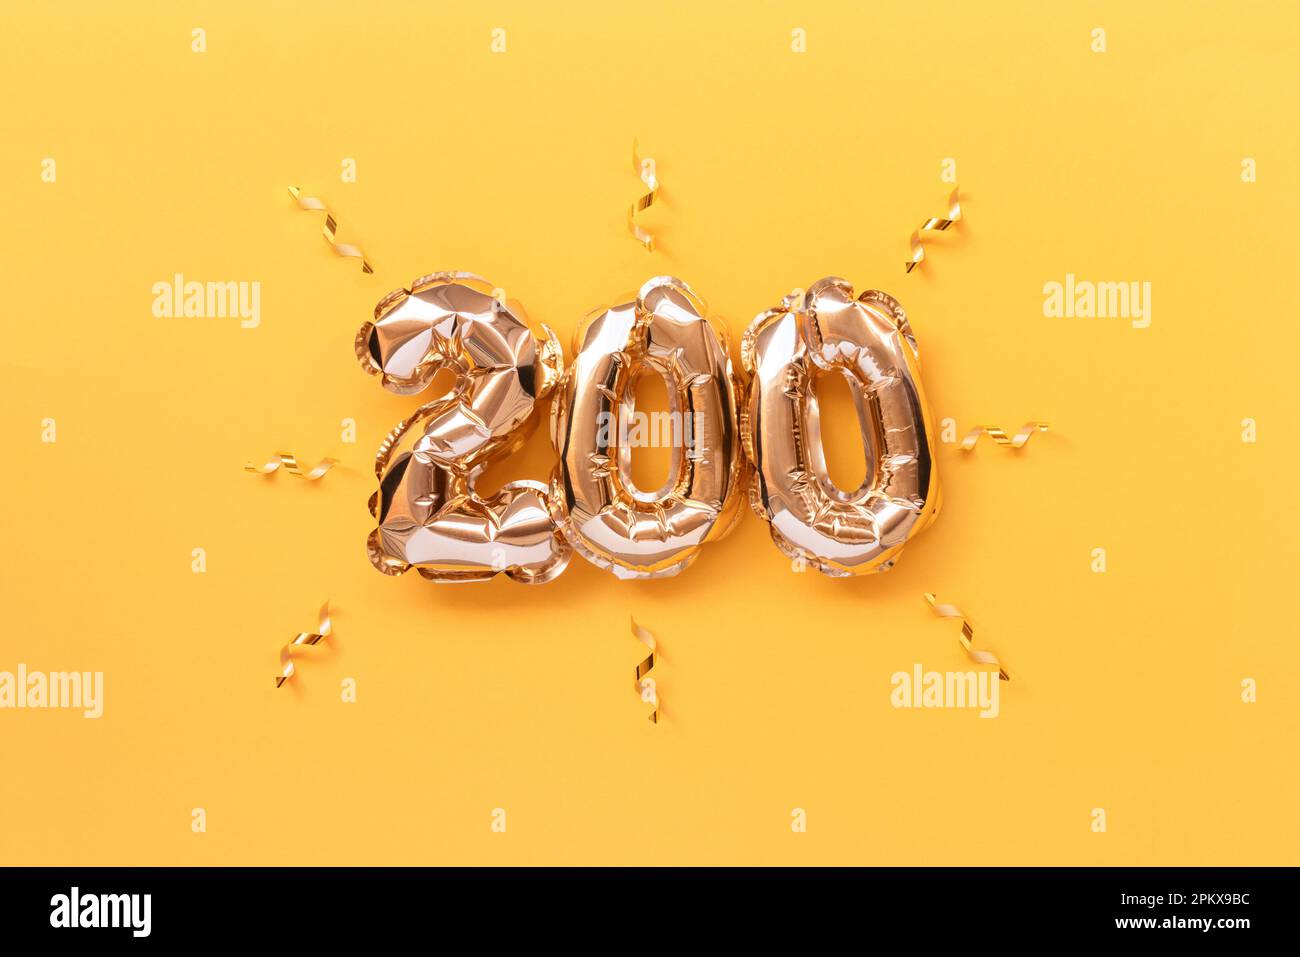 Number 200 golden air balloons with ribbons confetti on a yellow background. Stock Photo